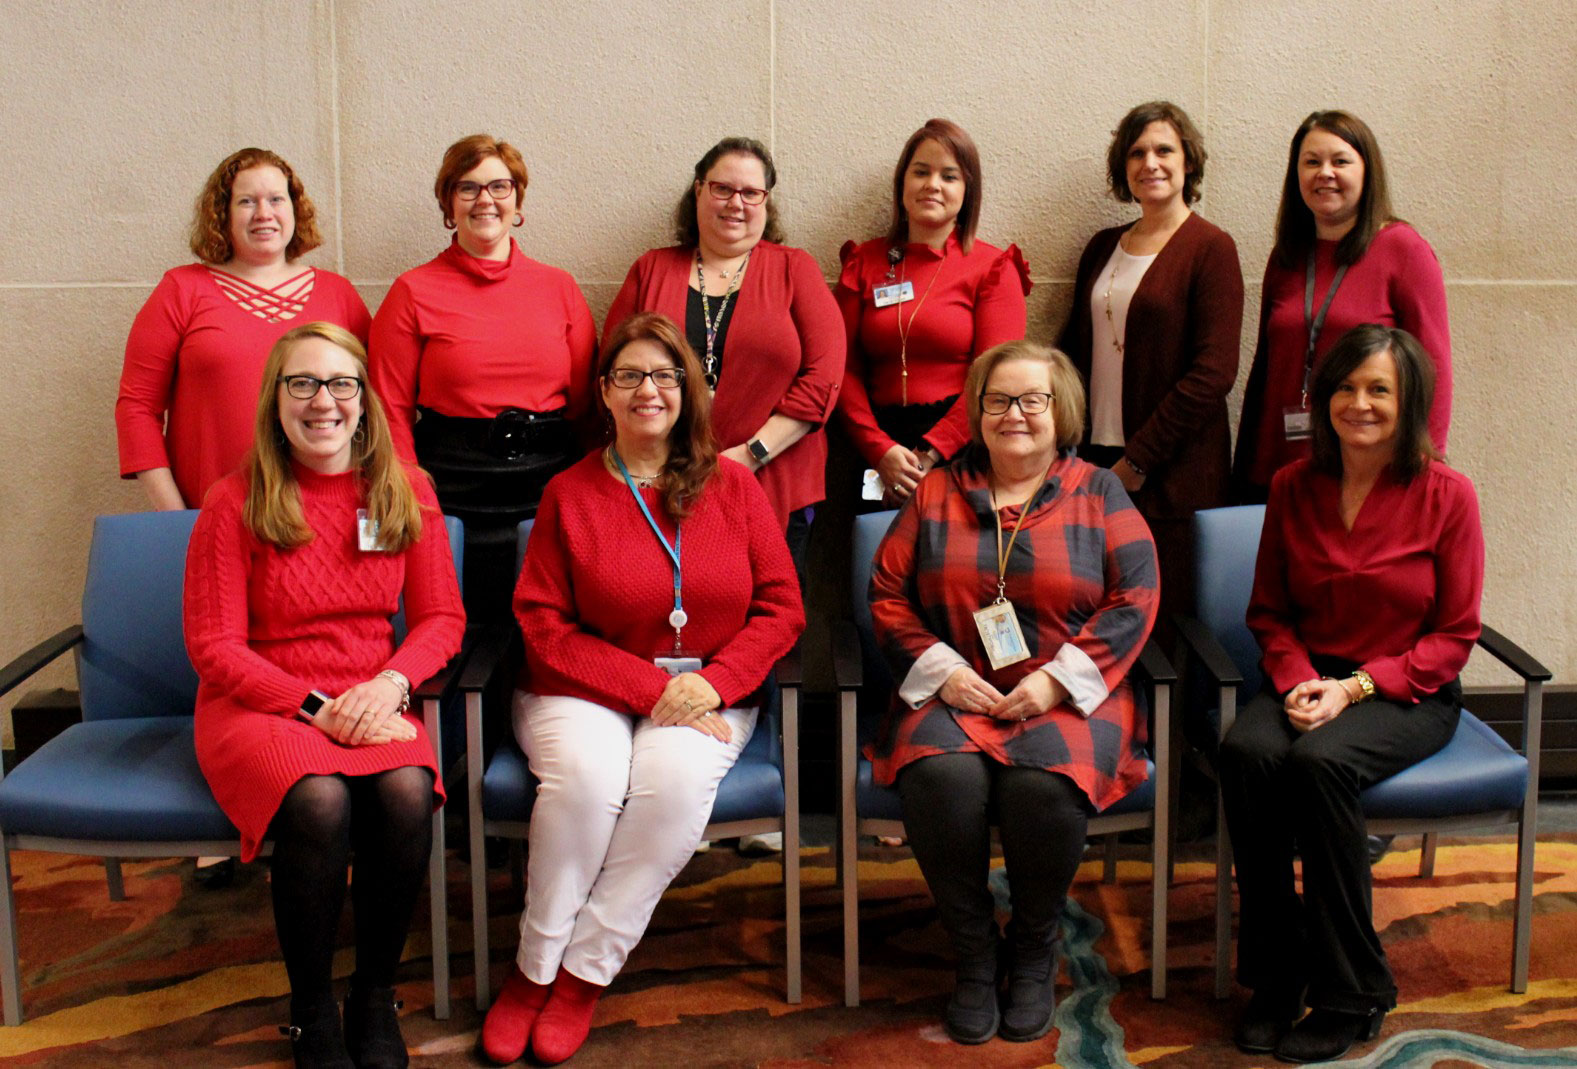 A group of 10 women is seen wearing various shades of red.